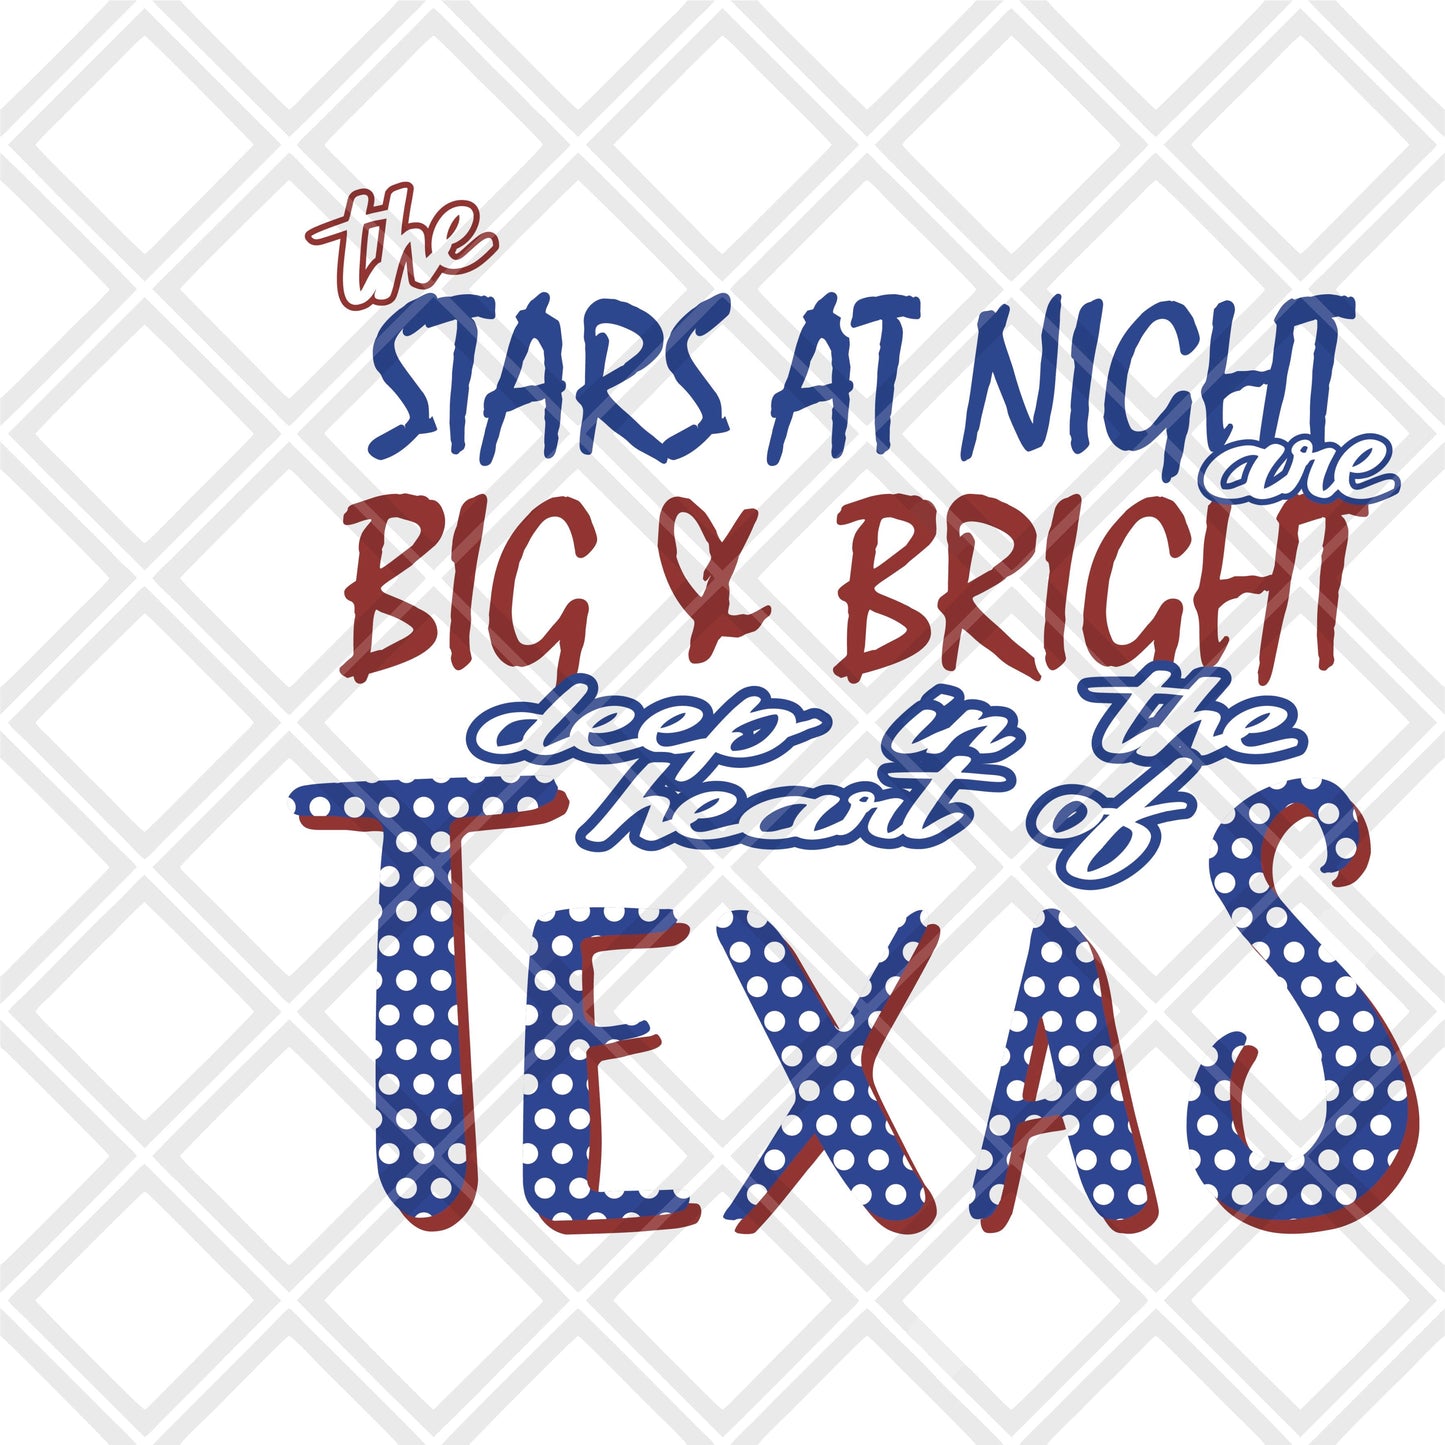 THE STARS AT NIGHT are big and bright deep in the heart of Texas DTF TRANSFERPRINT TO ORDER